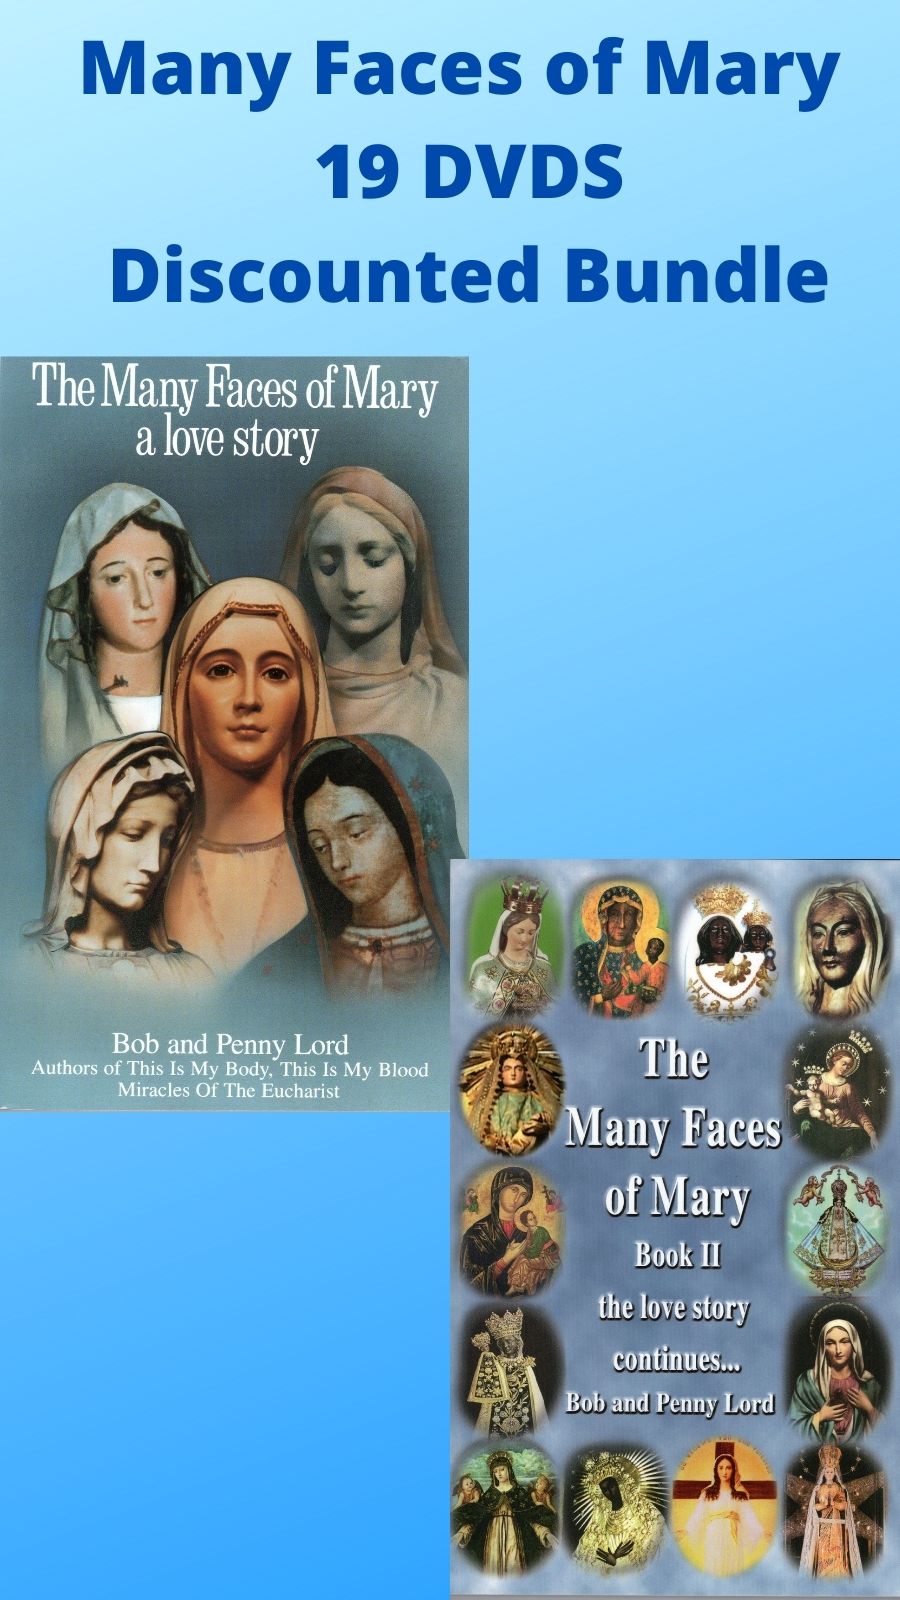 Many Faces of Mary Apparitions 19 DVDS Discounted Bundle - Bob and Penny Lord